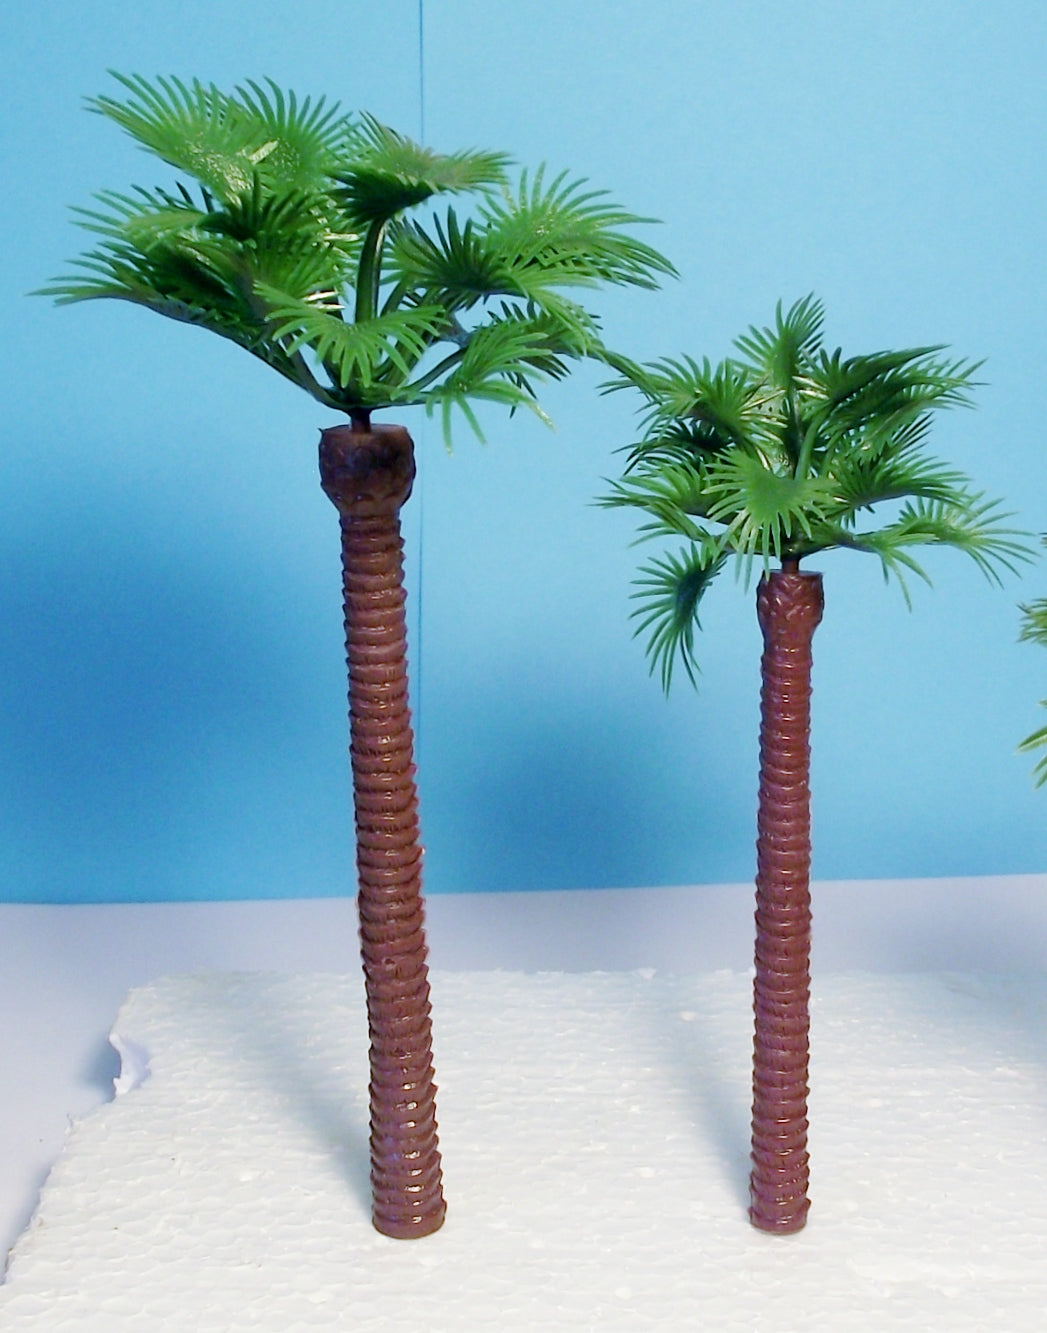 14 piece set of New Multi Gauge Use Model Palm Trees in 4 Sizes from 3 1/8" to 6"